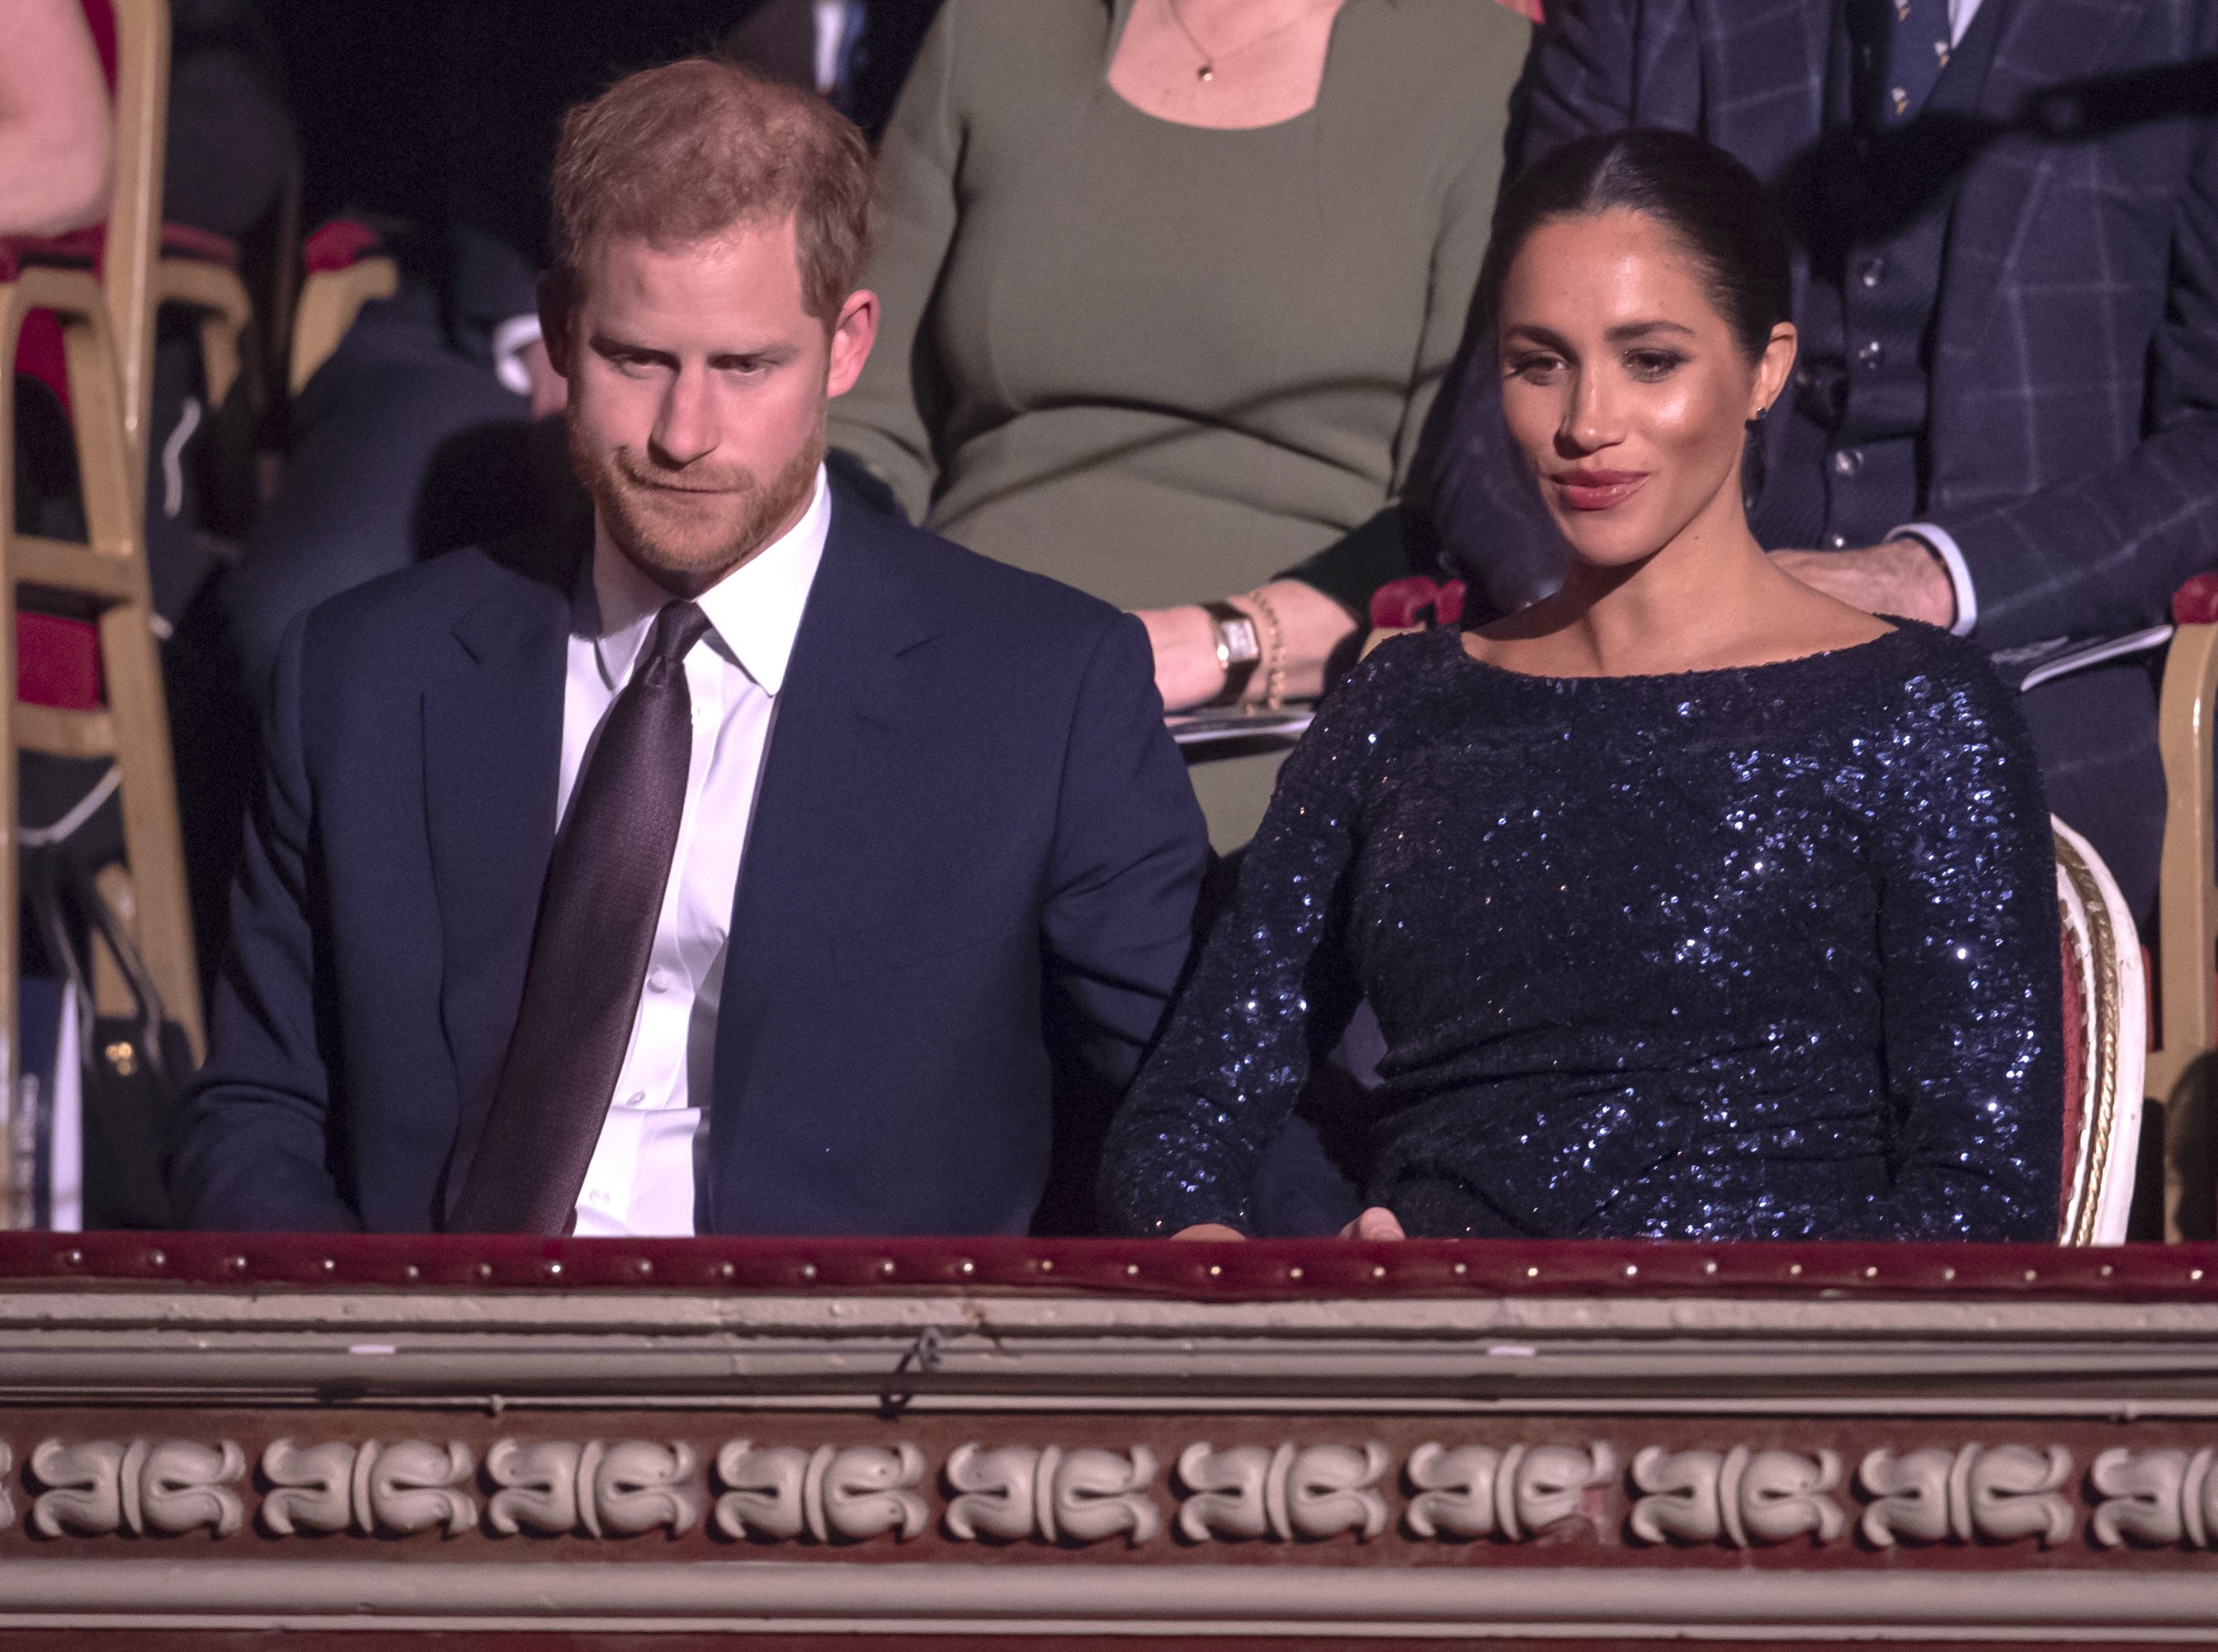 Prince Harry, Duke of Sussex, and Meghan Markle, Duchess of Sussex, attending the Cirque du Soleil premiere of "TOTEM" at the Royal Albert Hall on January 16, 2019 | Photo: Getty Images